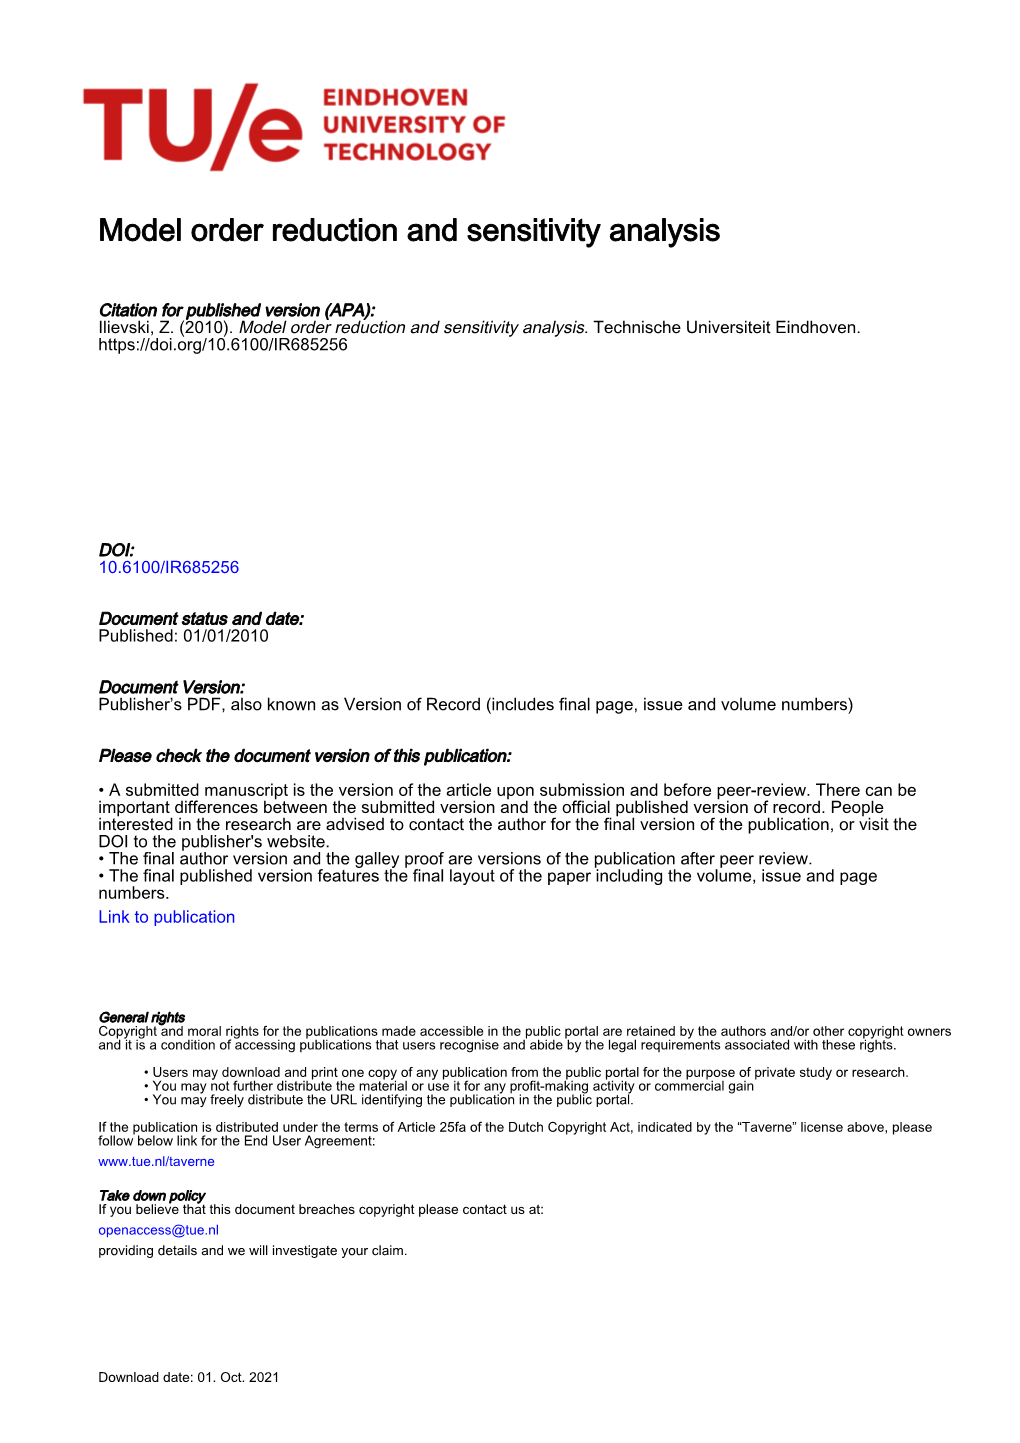 Model Order Reduction and Sensitivity Analysis